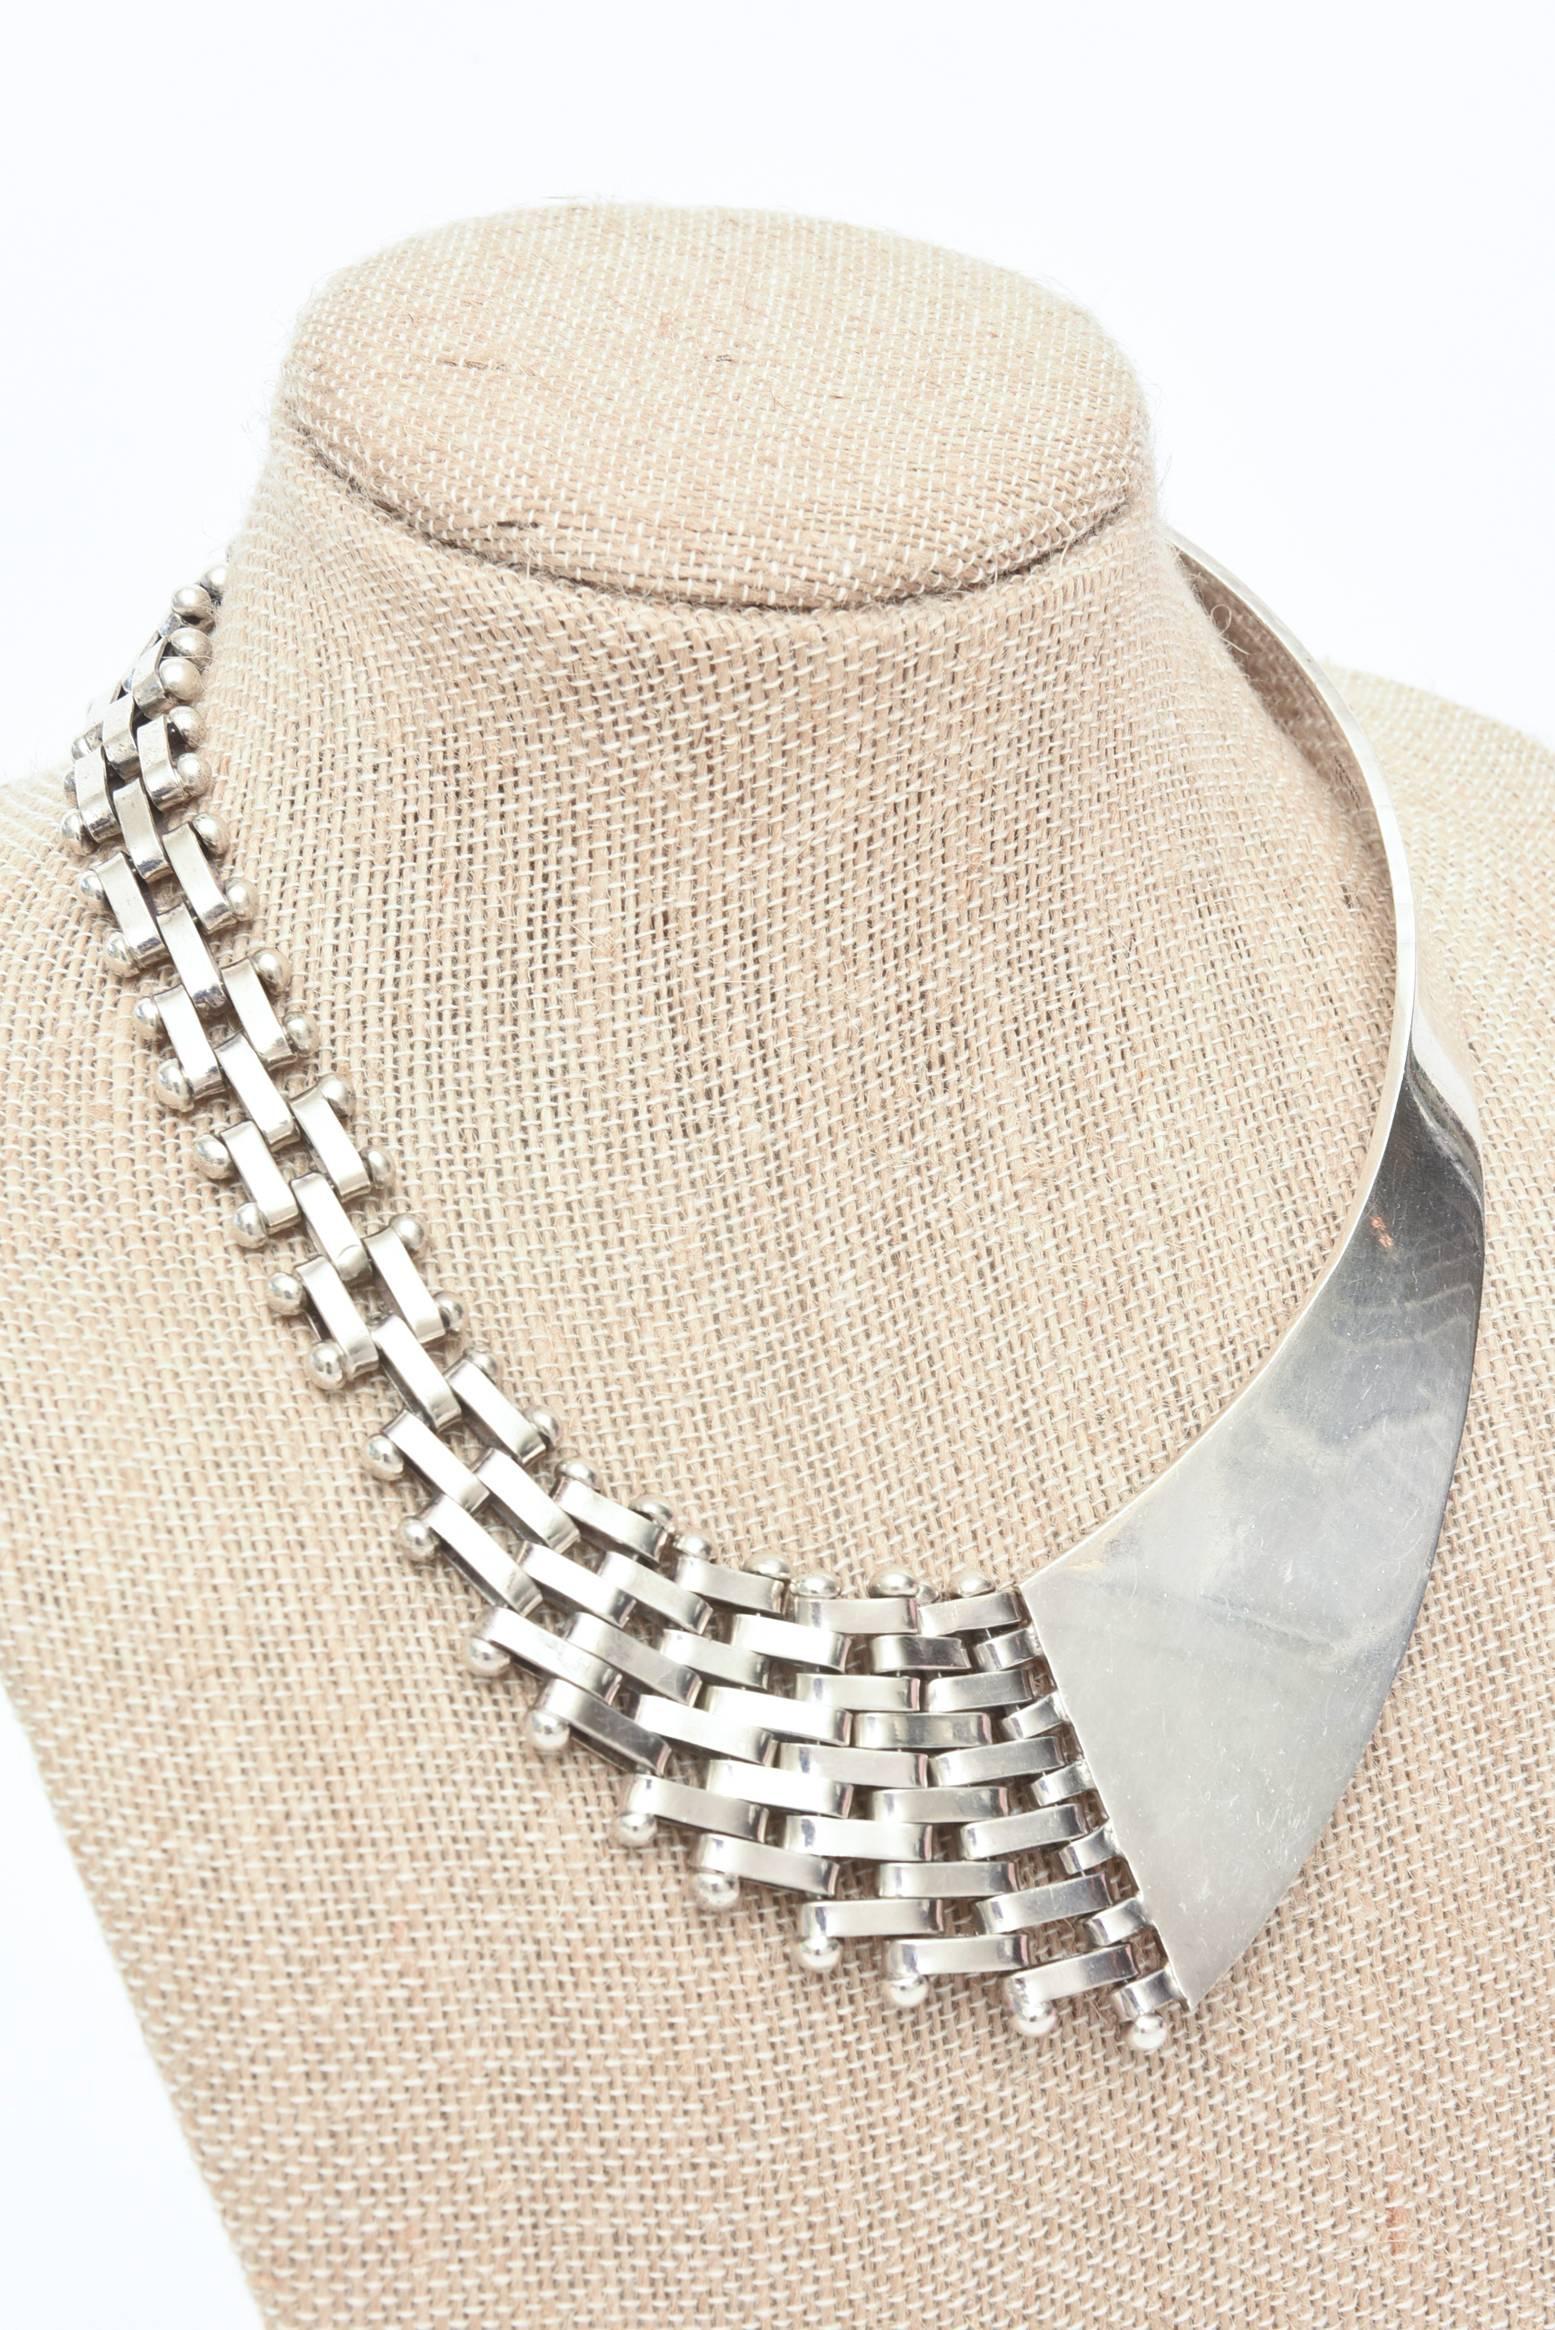 This handsome and sculptural Sterling Silver collar Necklace fits beautifully on the neck. 
The duality of the two sides; one with link and the other with polished sterling silver meet in the middle with a great combination.  The yin and the